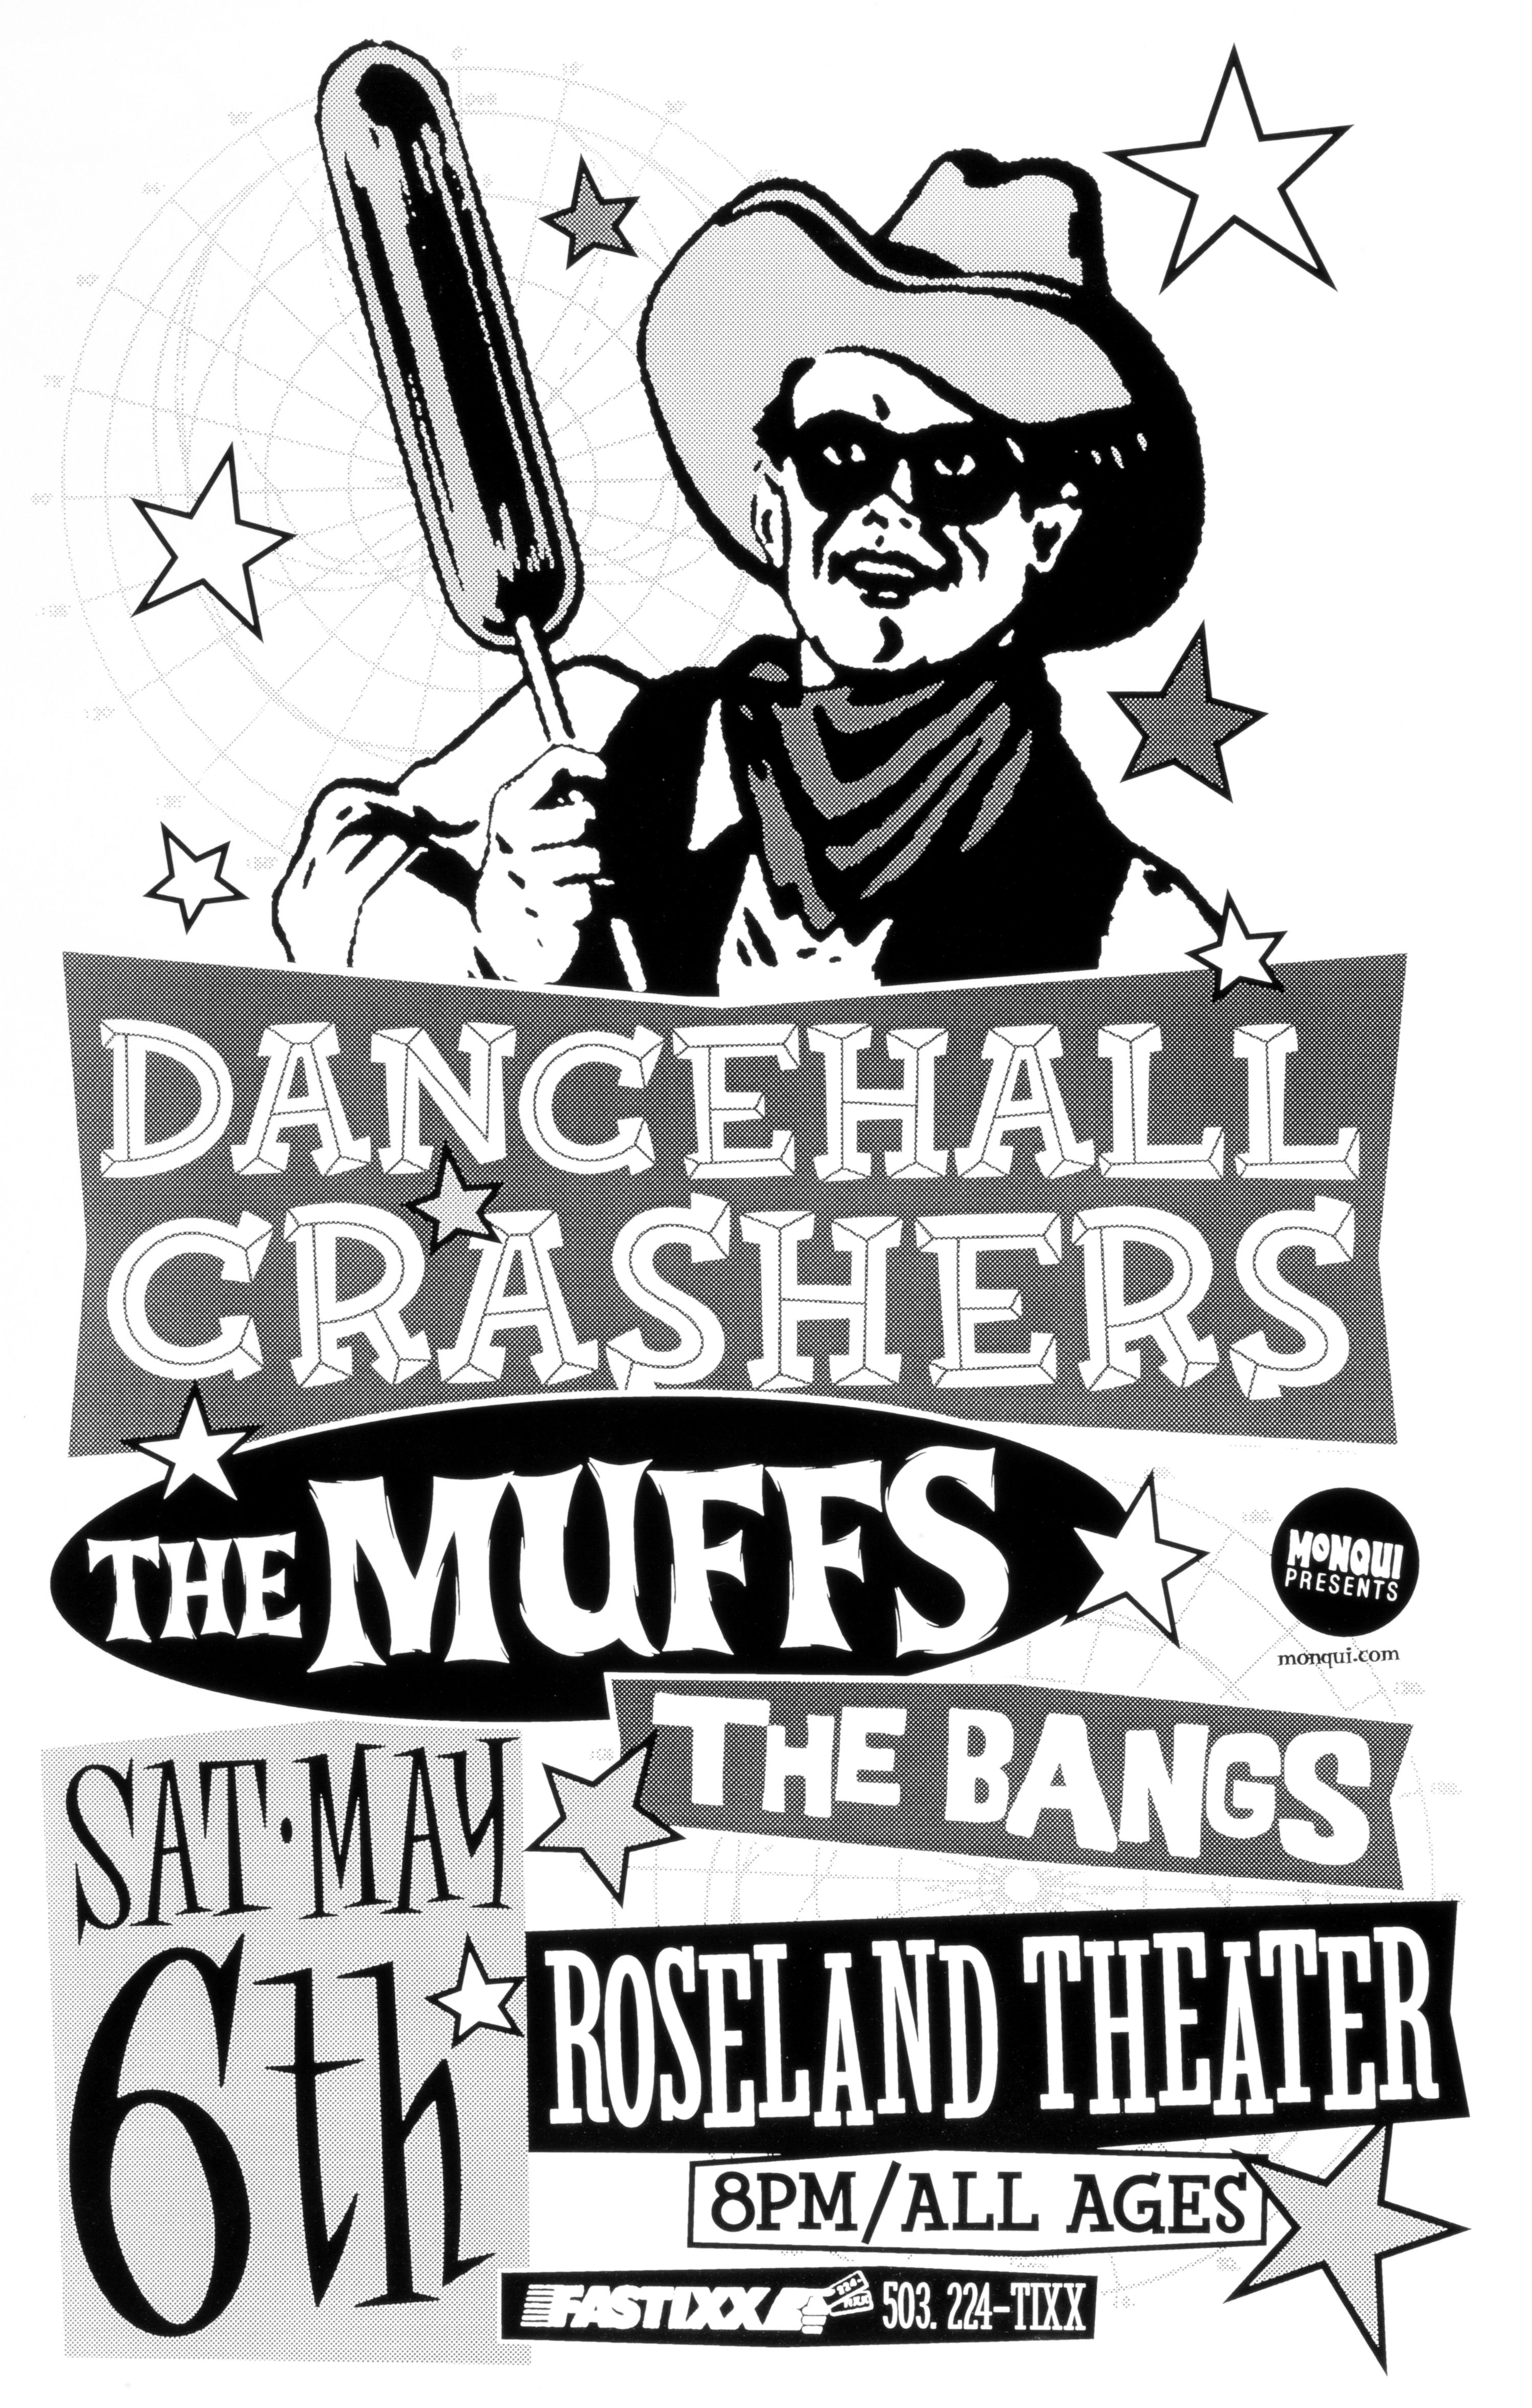 MXP-142.17 Dancehall Crashers 2000 Roseland Theater  May 6 Concert Poster